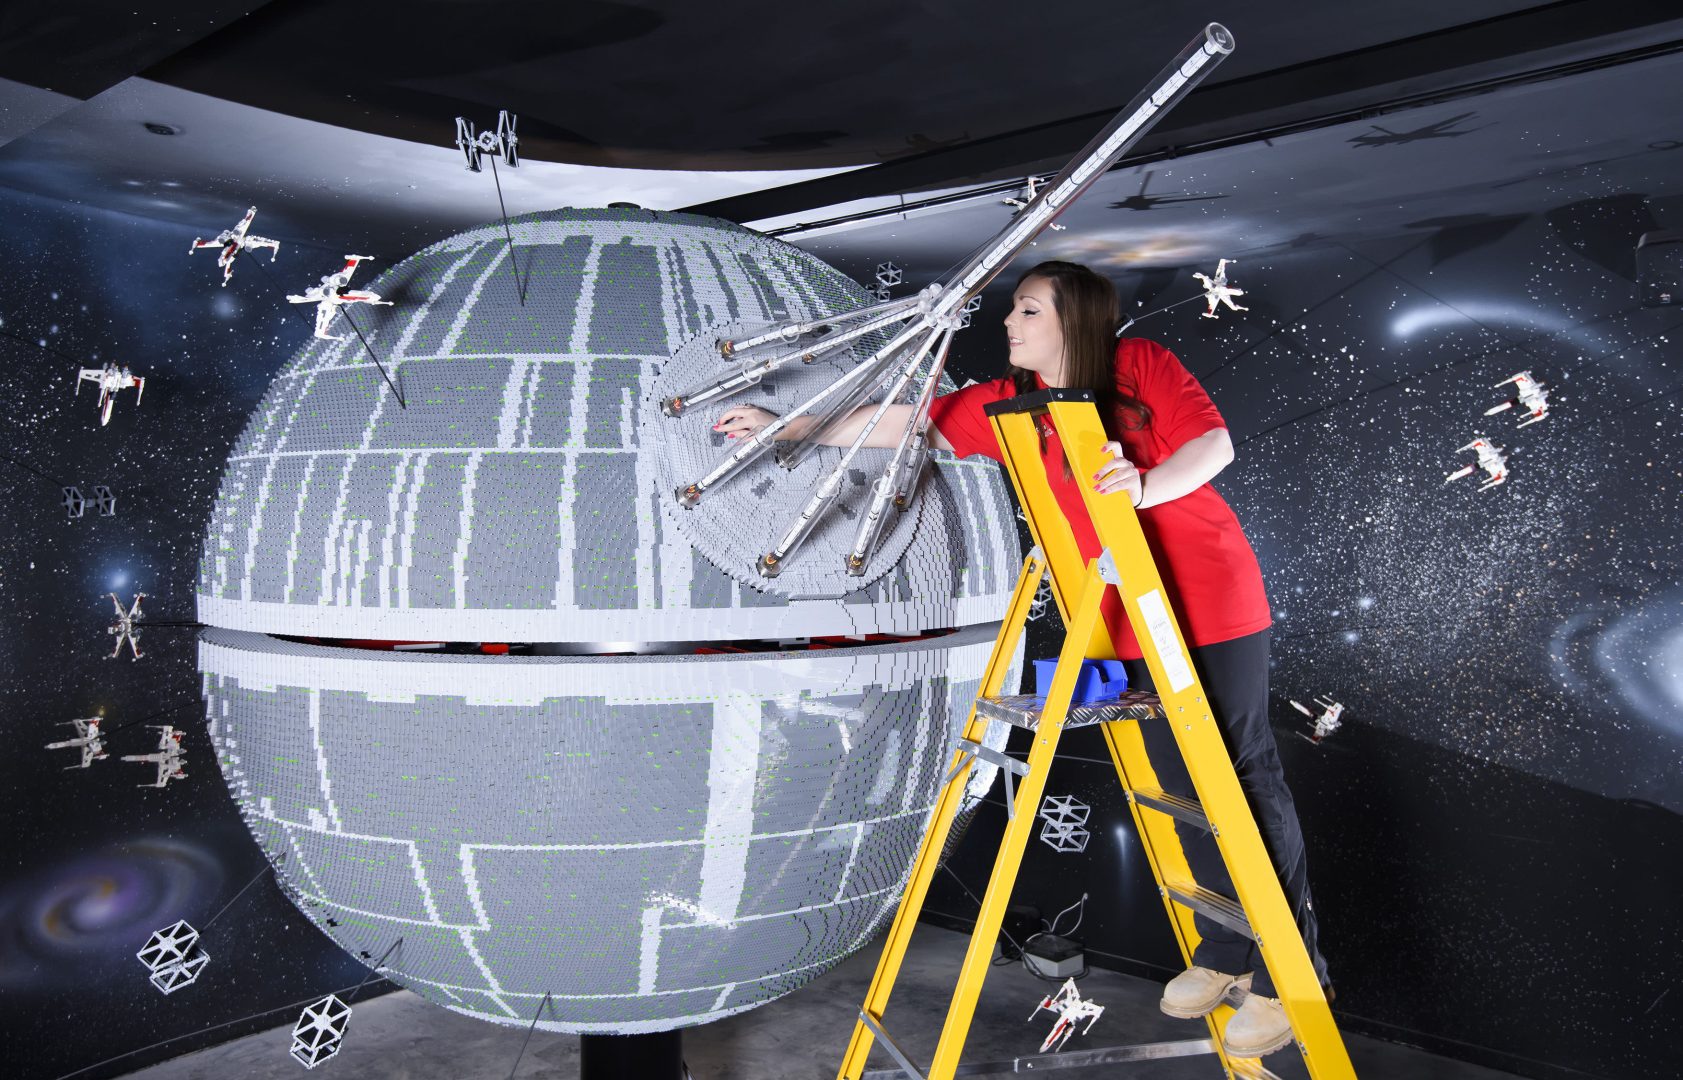 ONE OF THE WORLD’S BIGGEST EVER LEGO® STAR WARS™ MODELS INSTALLED AT THE LEGOLAND® WINDSOR RESORT.   LAST PIECES PUT IN PLACE ON 500,000 LEGO® BRICK DEATH STAR LEGOLAND® Model Maker, Phoebe Rumbol, puts the finishing touches to one of the most impressive and biggest LEGO® Star Wars™ models ever created as a 500,000 brick LEGO® Star Wars™ recreation of The Death Star is installed in a new finale to the Resort’s LEGO® Star Wars™ Miniland Model Display. The operation took three days as the massive new 2.4 metre wide, 3 metre high creation was carefully hoisted into position and the final bricks  were put in place. The hefty 860kg perfectly spherical model took 15 Model Makers three months to build and  guests can trigger special effects and bring the scene to life when it opens at the Resort on 11 March.  TM & © Lucasfilm Ltd. All rights reserved